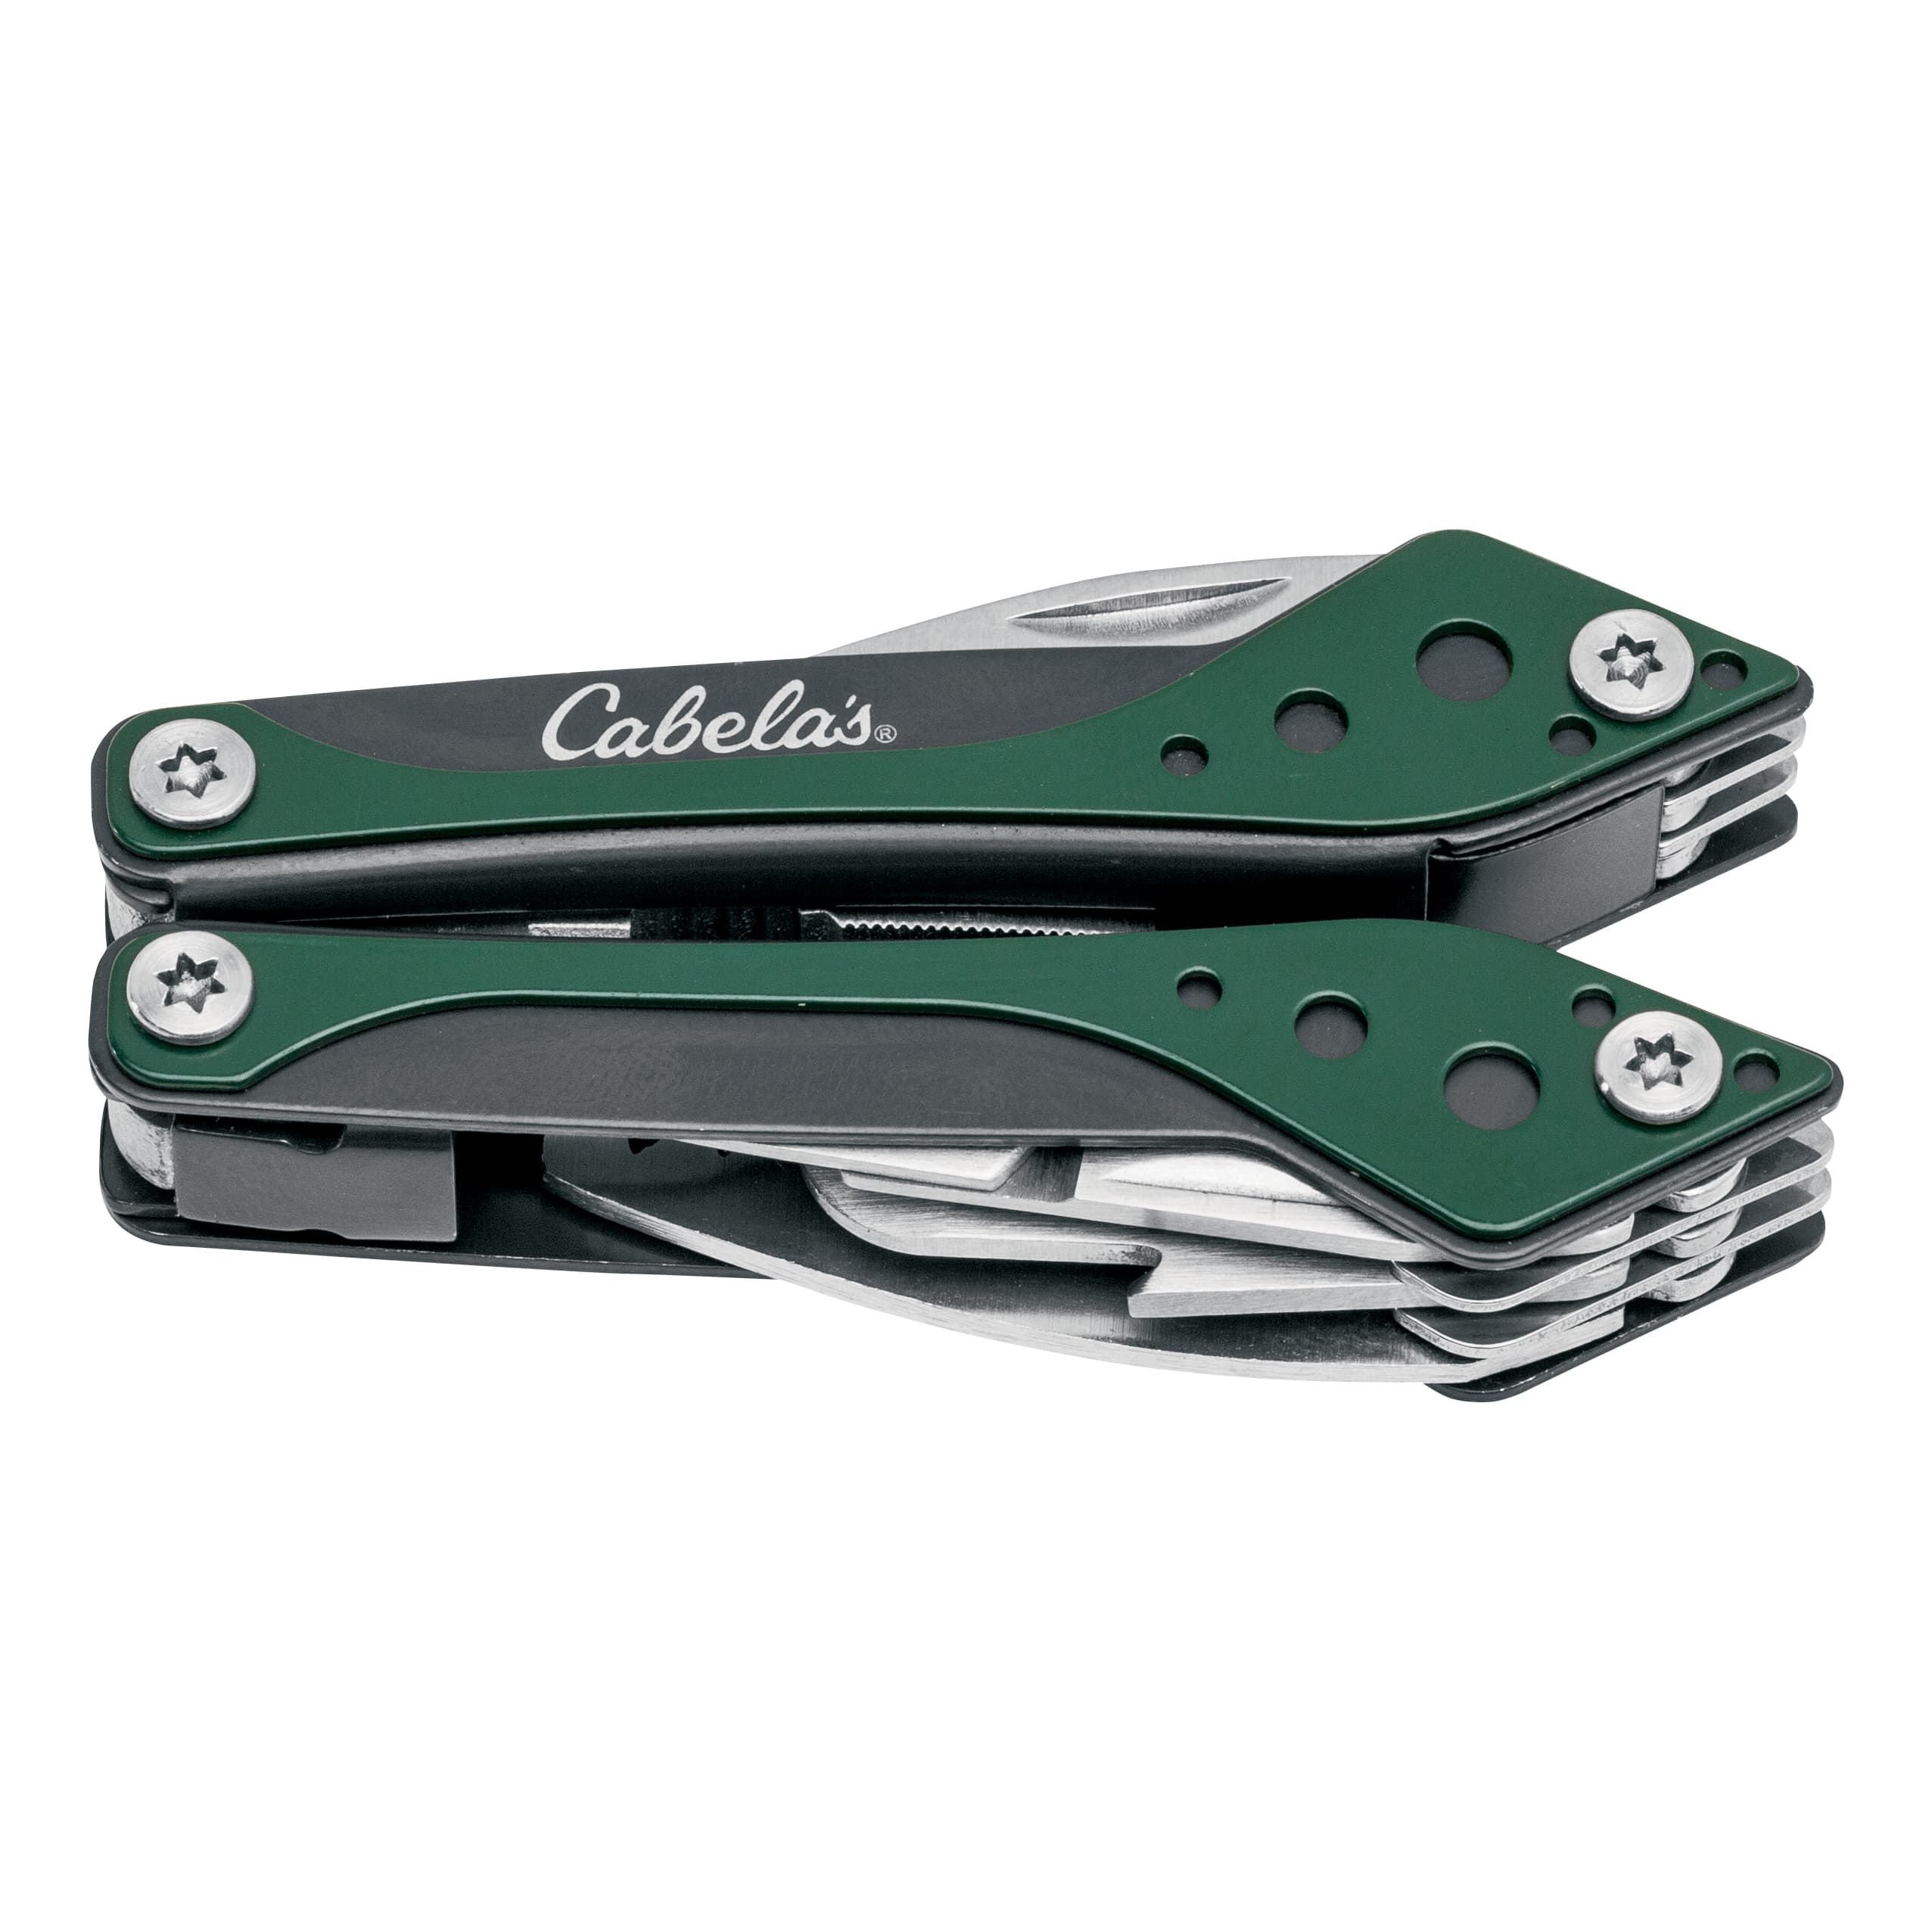 Cabela's Multitool - Green - Closed View